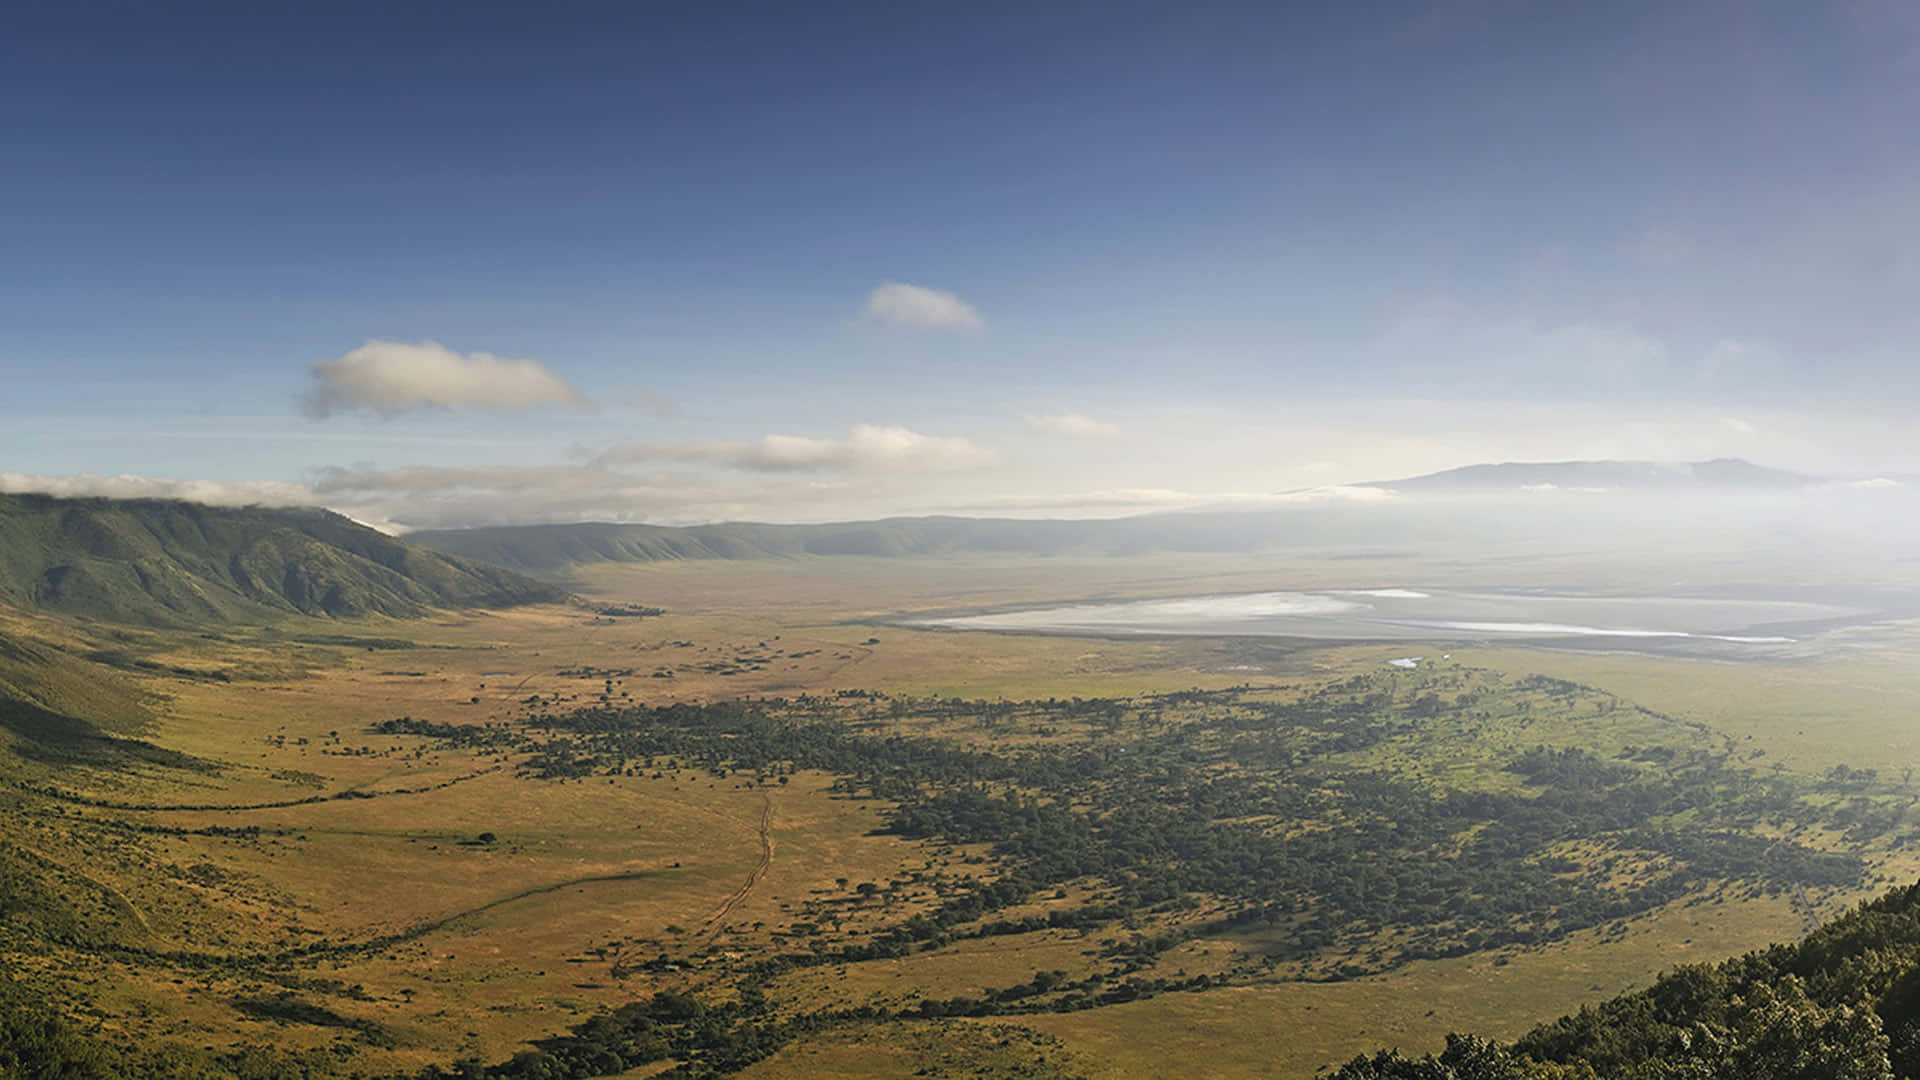 A Grand Aerial View of the Ngorongoro Crater in Northern Tanzania. Wallpaper